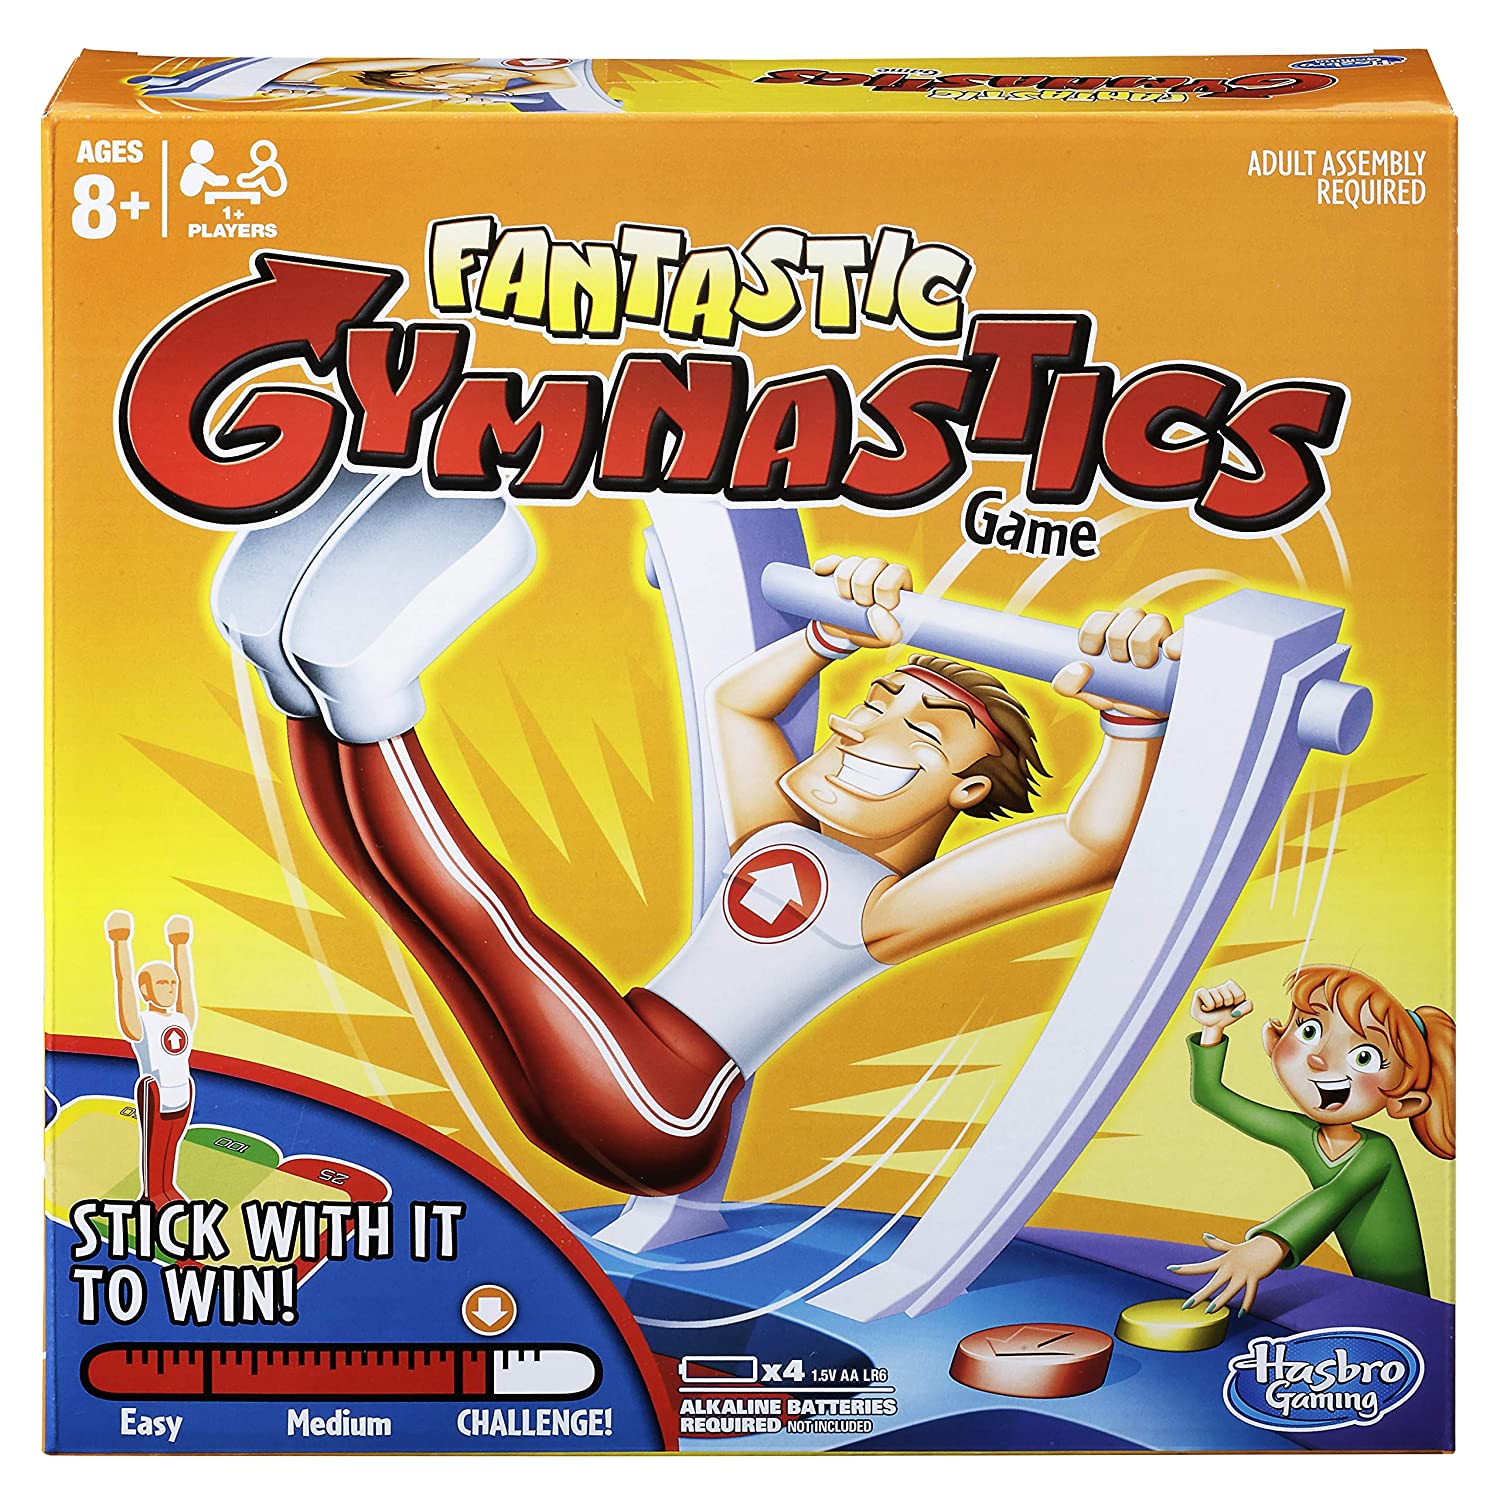 Hasbro Gaming Fantastic Gymnastics Hasbro Gaming Fantastic GymnasticsGet him to land on the mat, on his feet for the win
Stick the perfect landing. Ages 8 and up. 4 x 1.5V AA size alkaline batteries required(Not included)
Play solo, head-to-head, or challenge friends to a tournament
Aim to get the perfect 100-point score